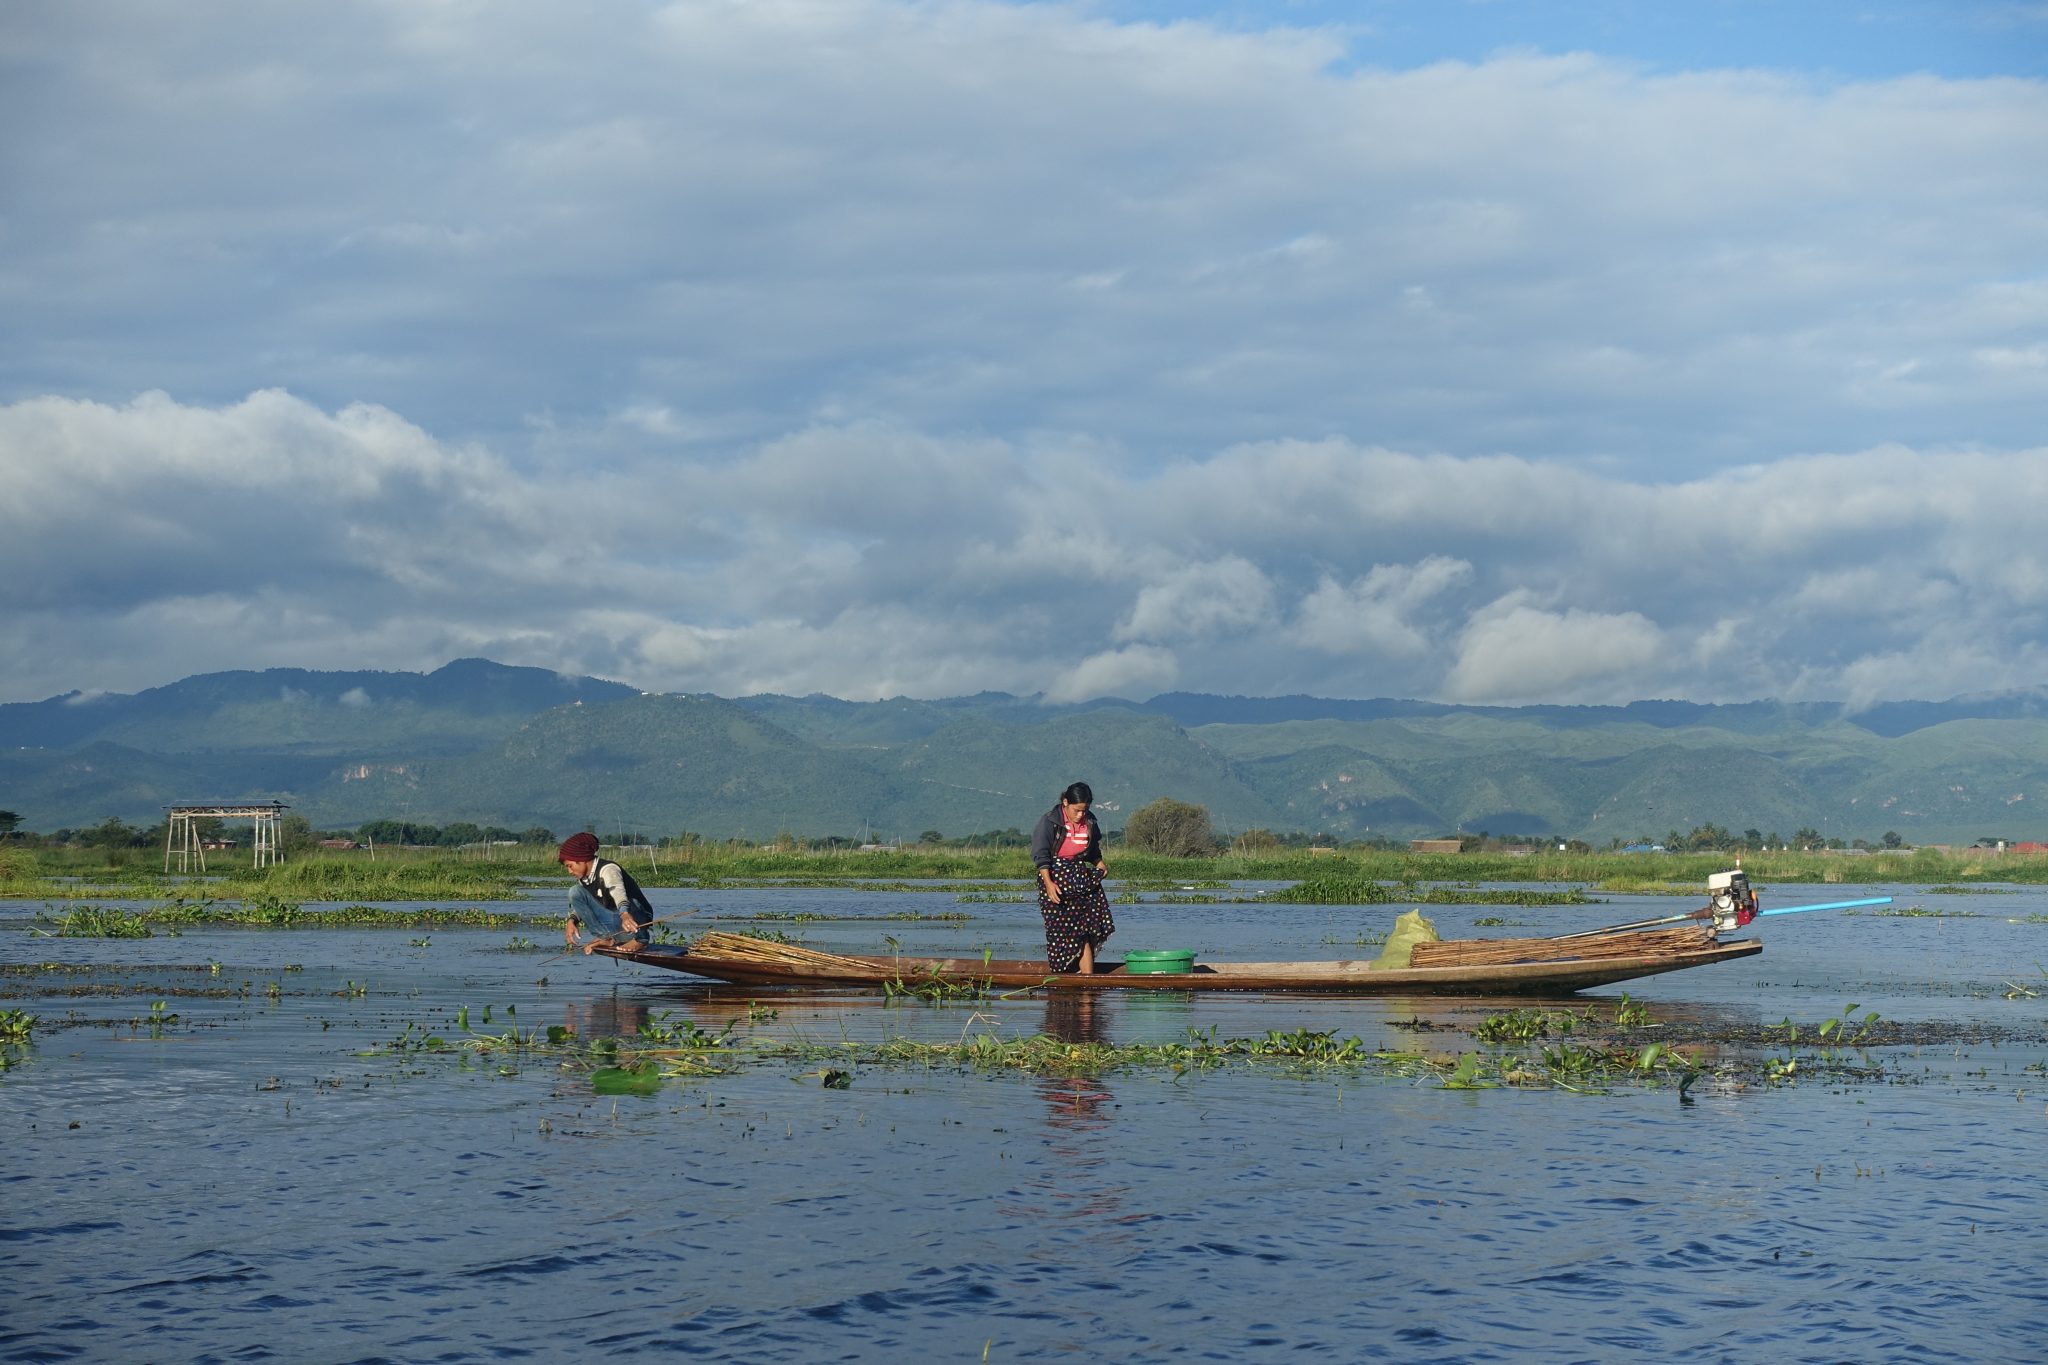 Fishermen on a boat in Inle lake at sunrise time